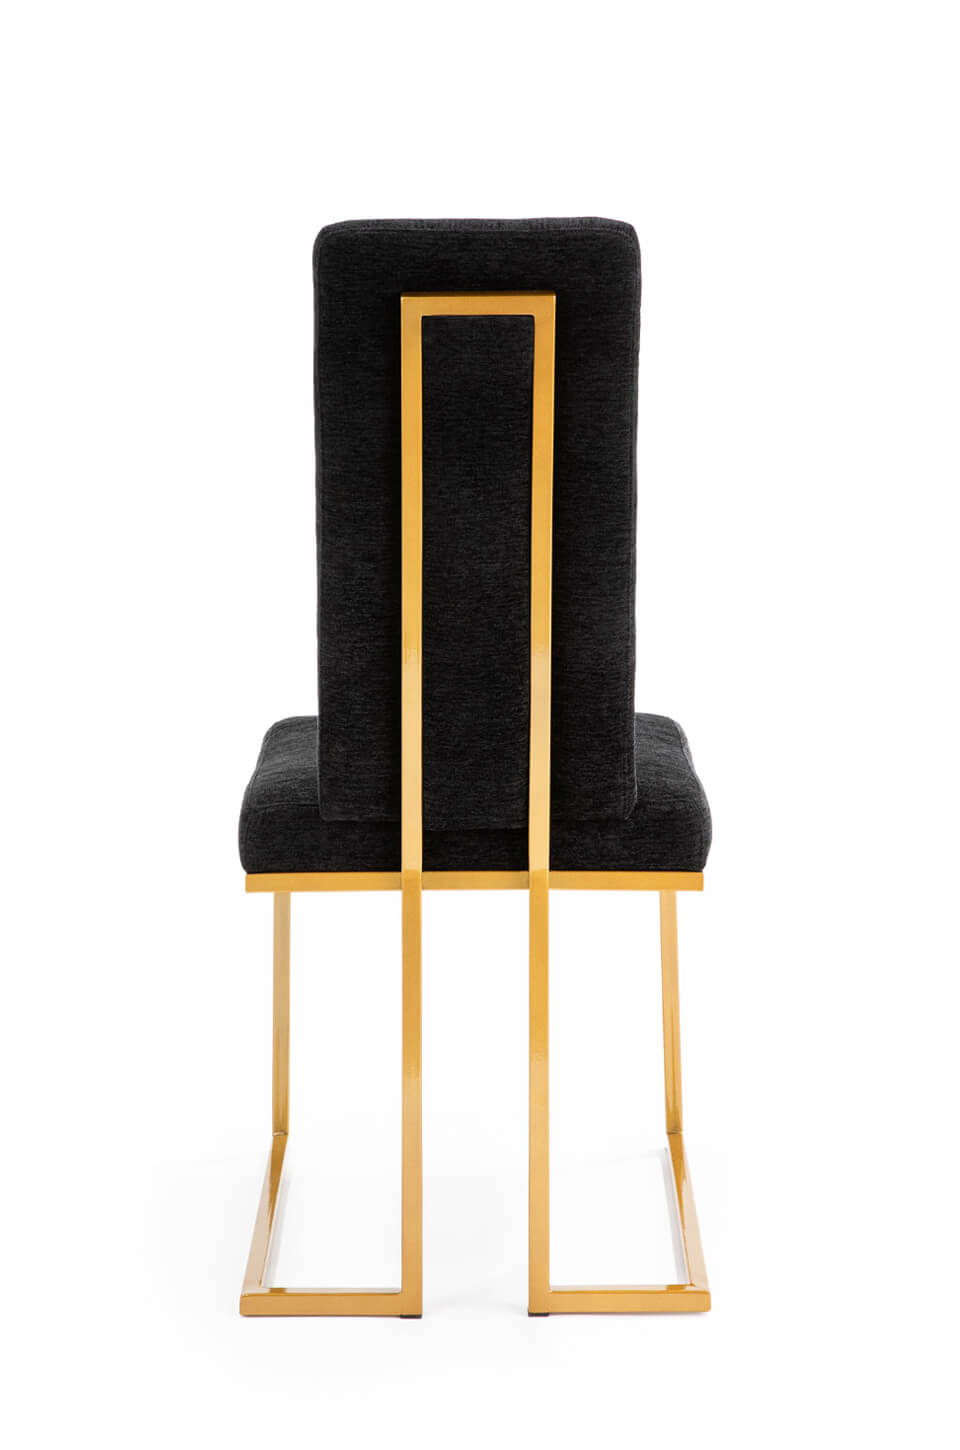 Wesley Allen's Brentwood Modern Chair with High Back in Black and Gold - Back View